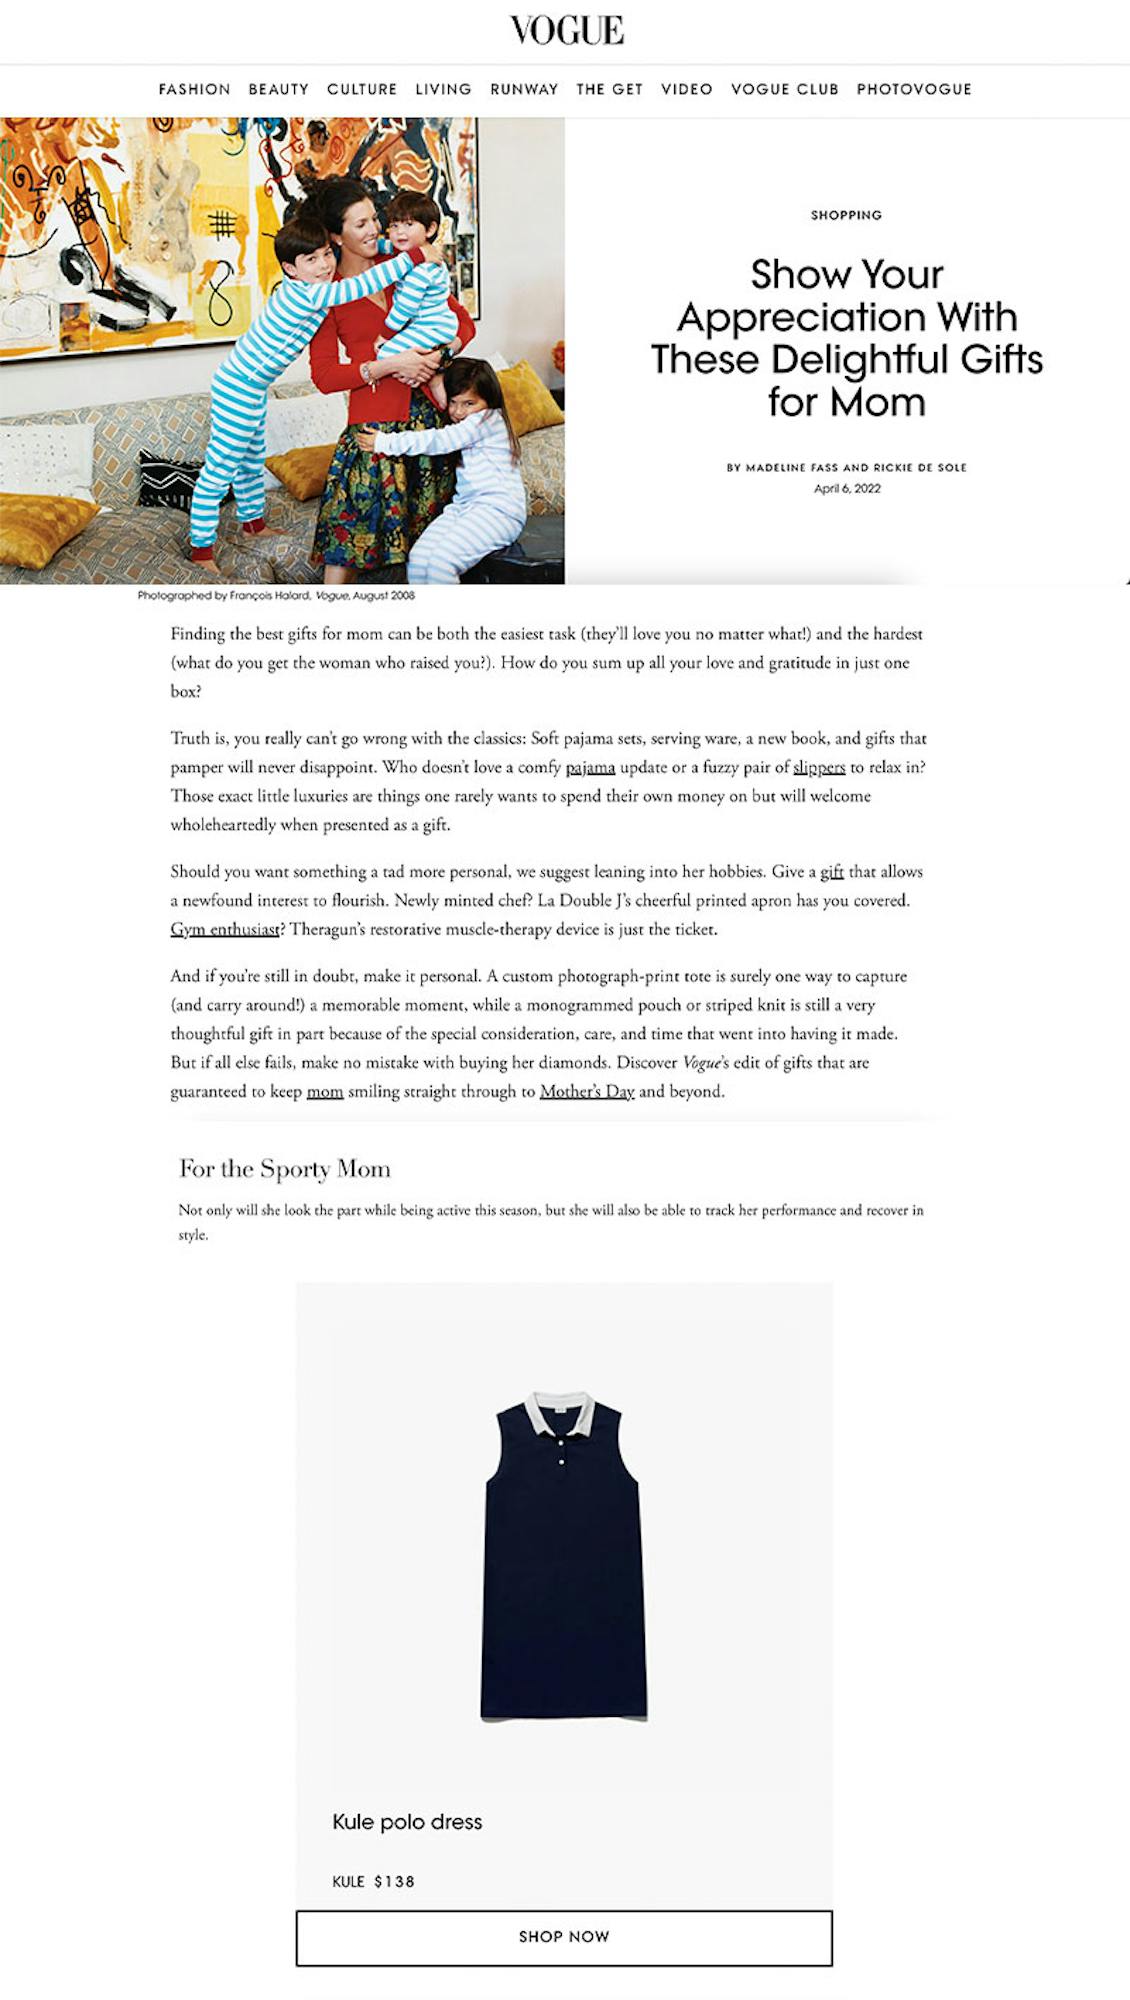 Vogue featuring kule polo dress as mother's day mom gift